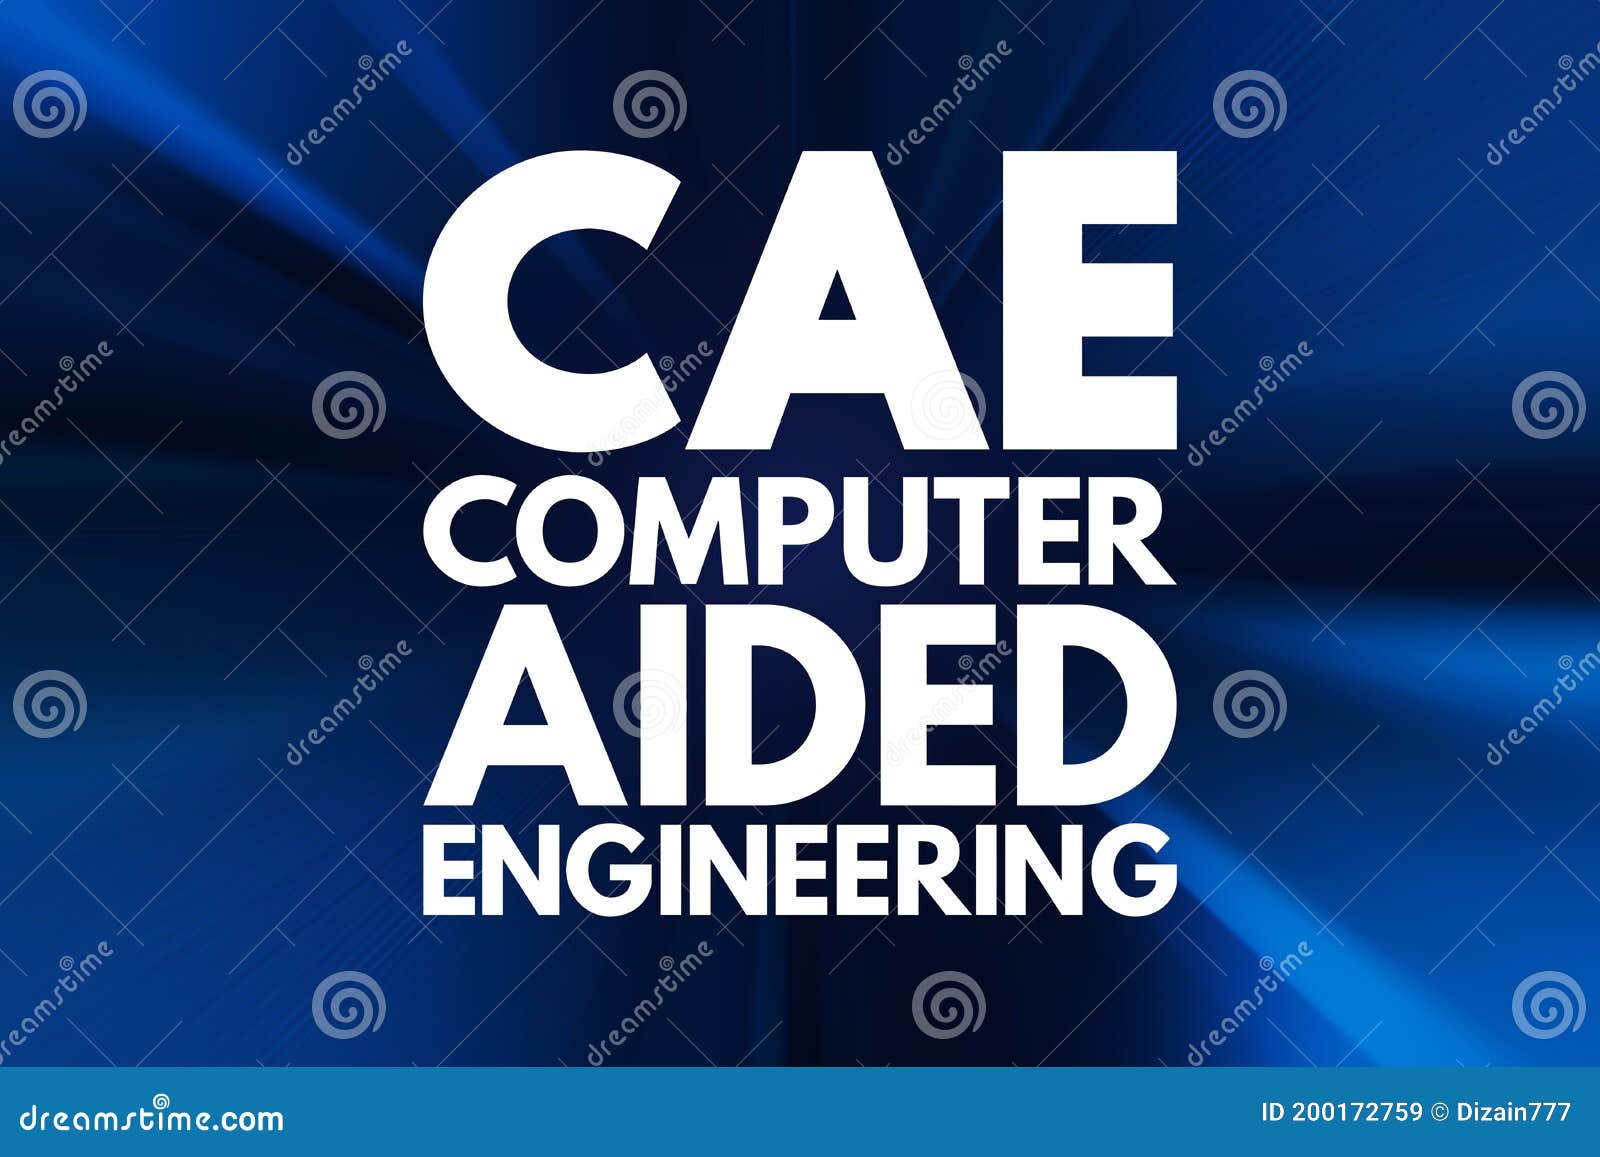 cae - computer aided engineering acronym, technology concept background